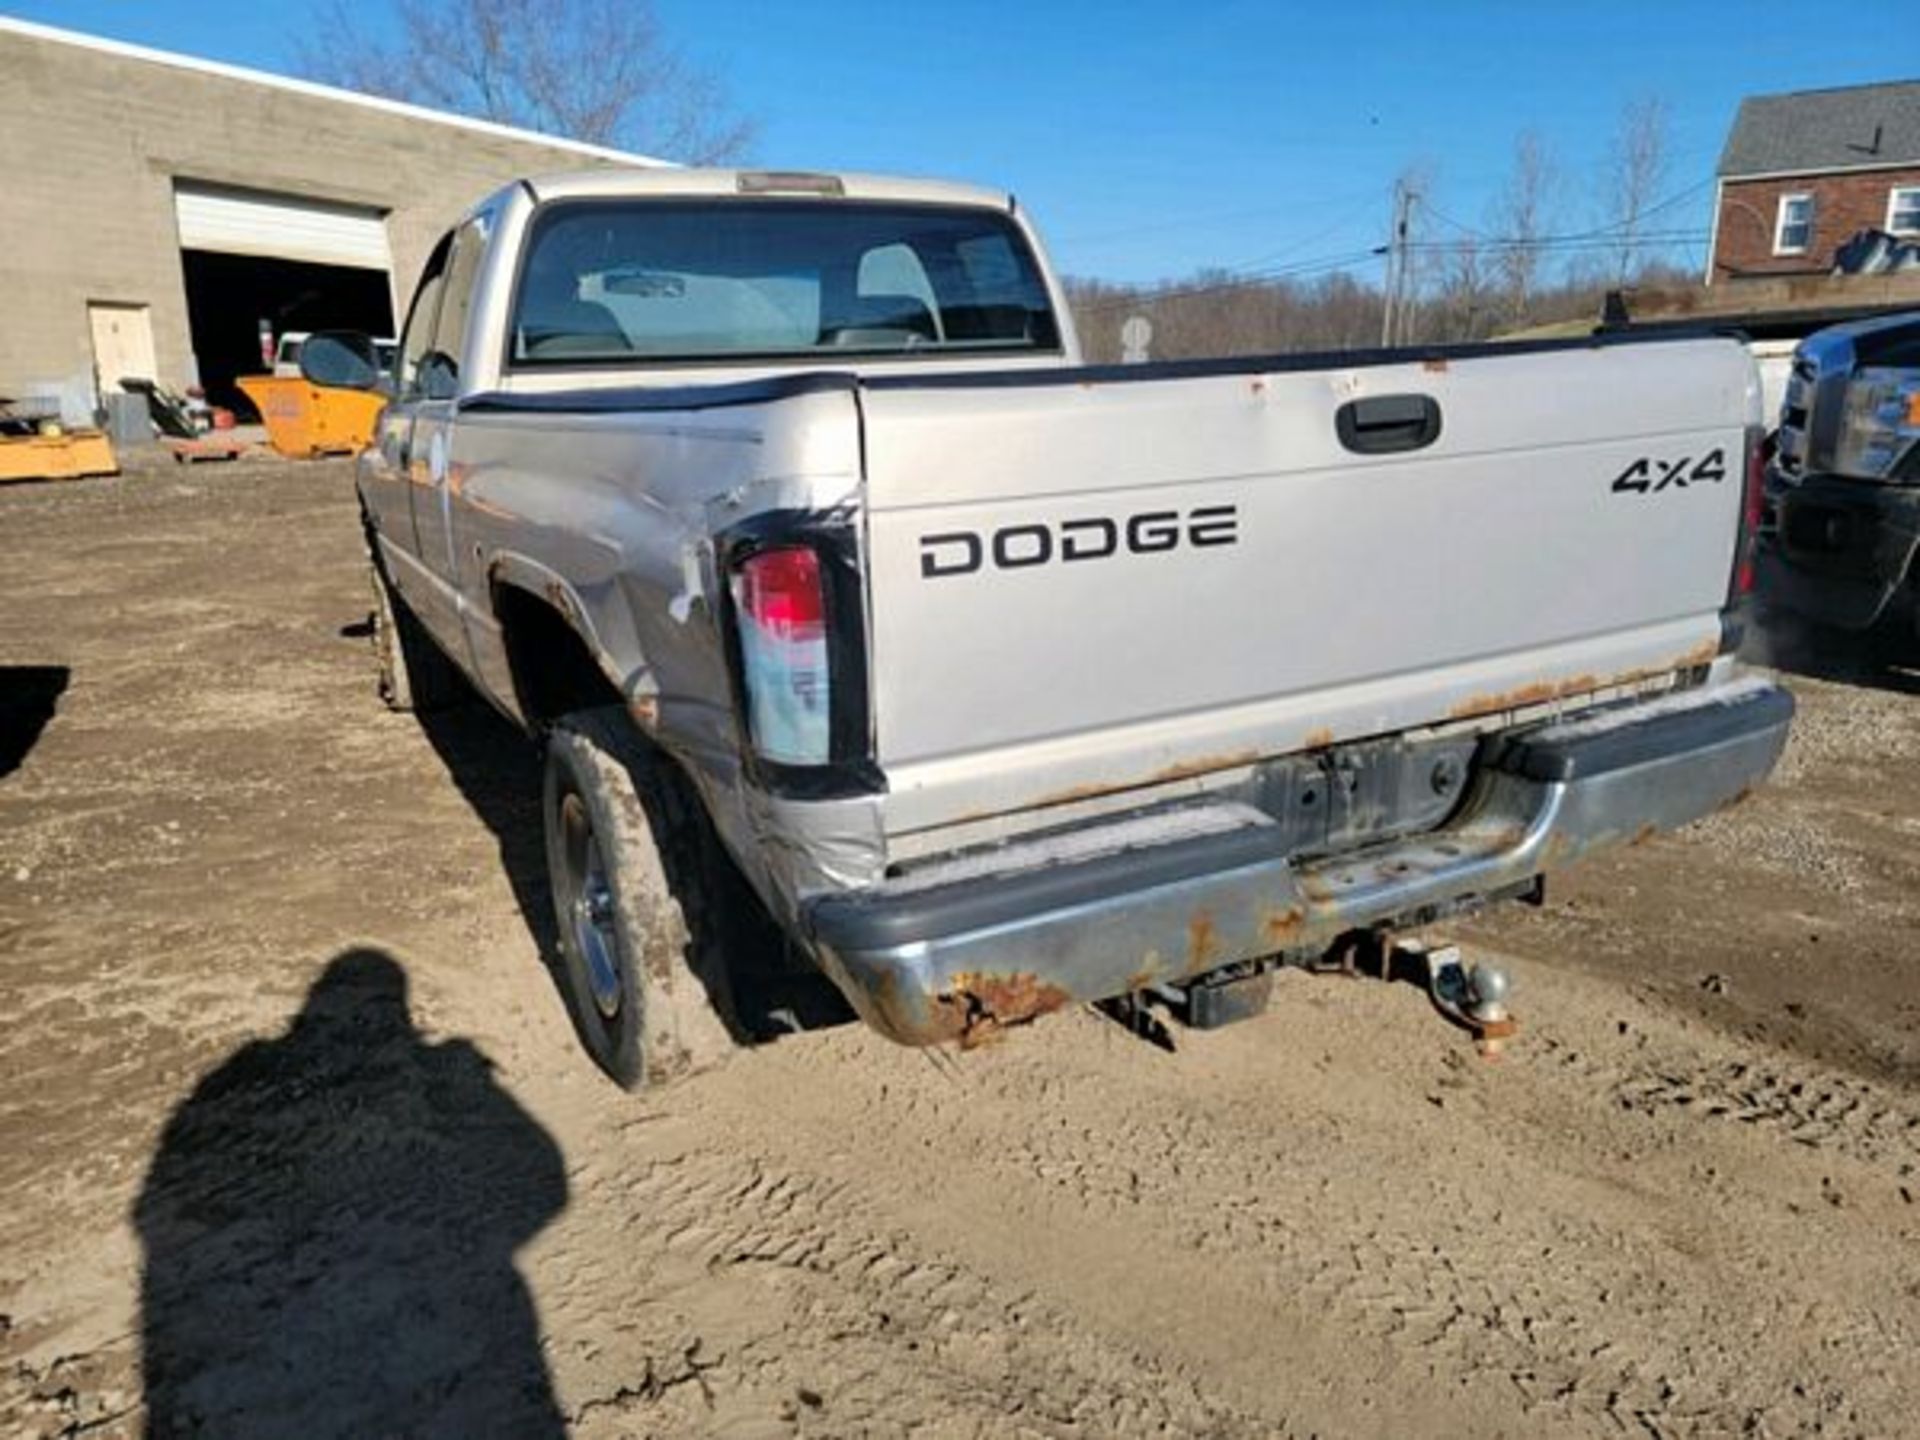 1998 DODGE RAM 1500 EXTENDED CAB 4X4 TRUCK - RUNS GOOD - SALVAGE TITLE - 164,640 MILES - Image 3 of 9